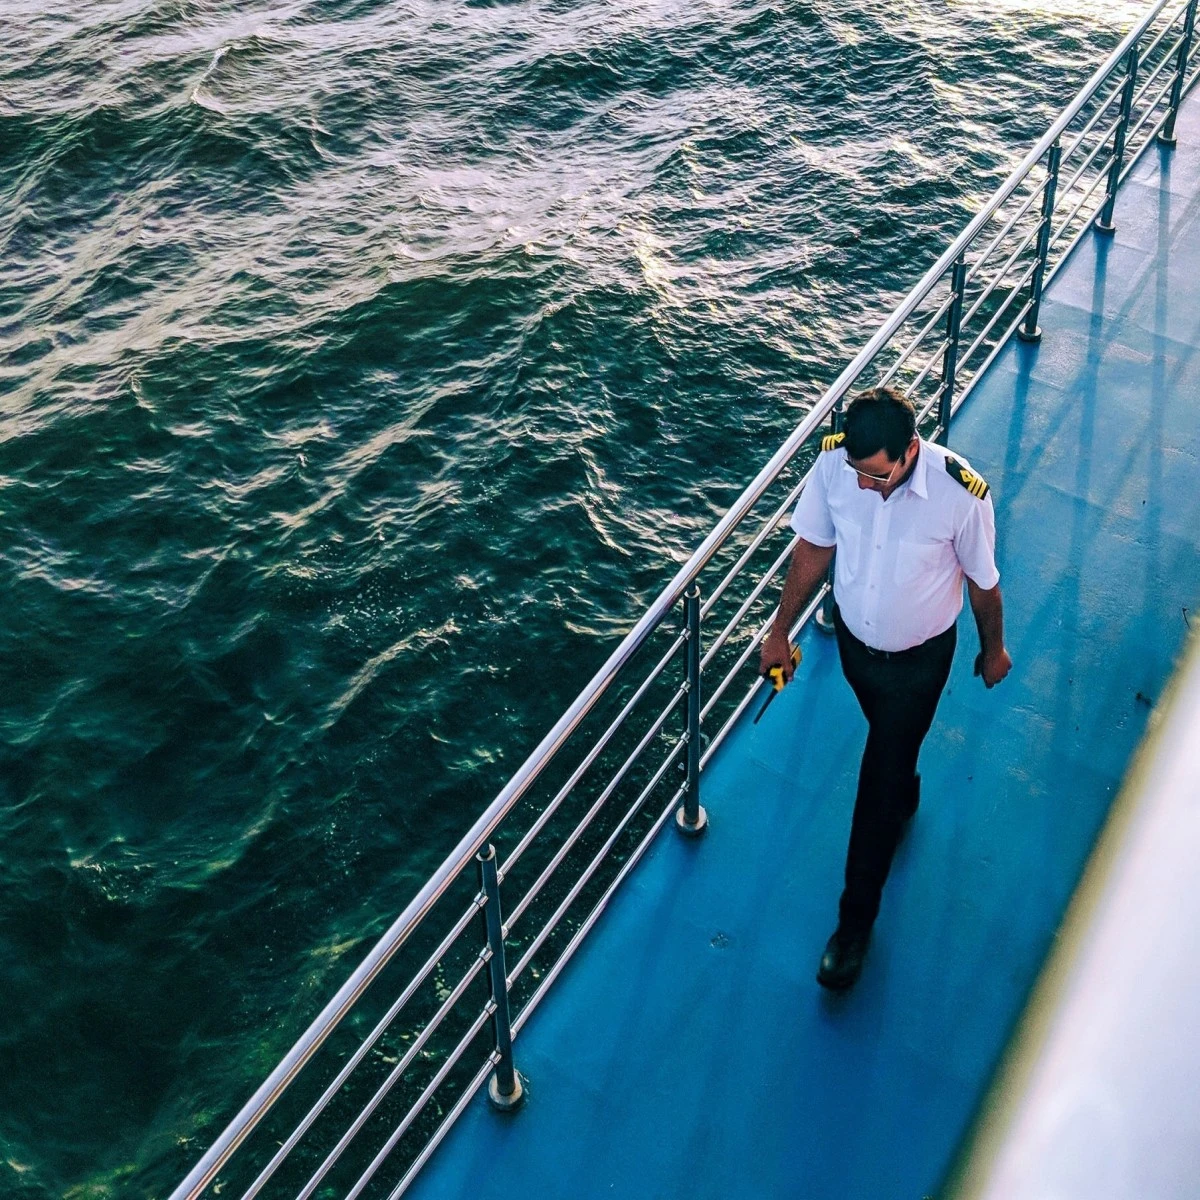 Aerial view of man walking on cruise ship next to body of water during daytime